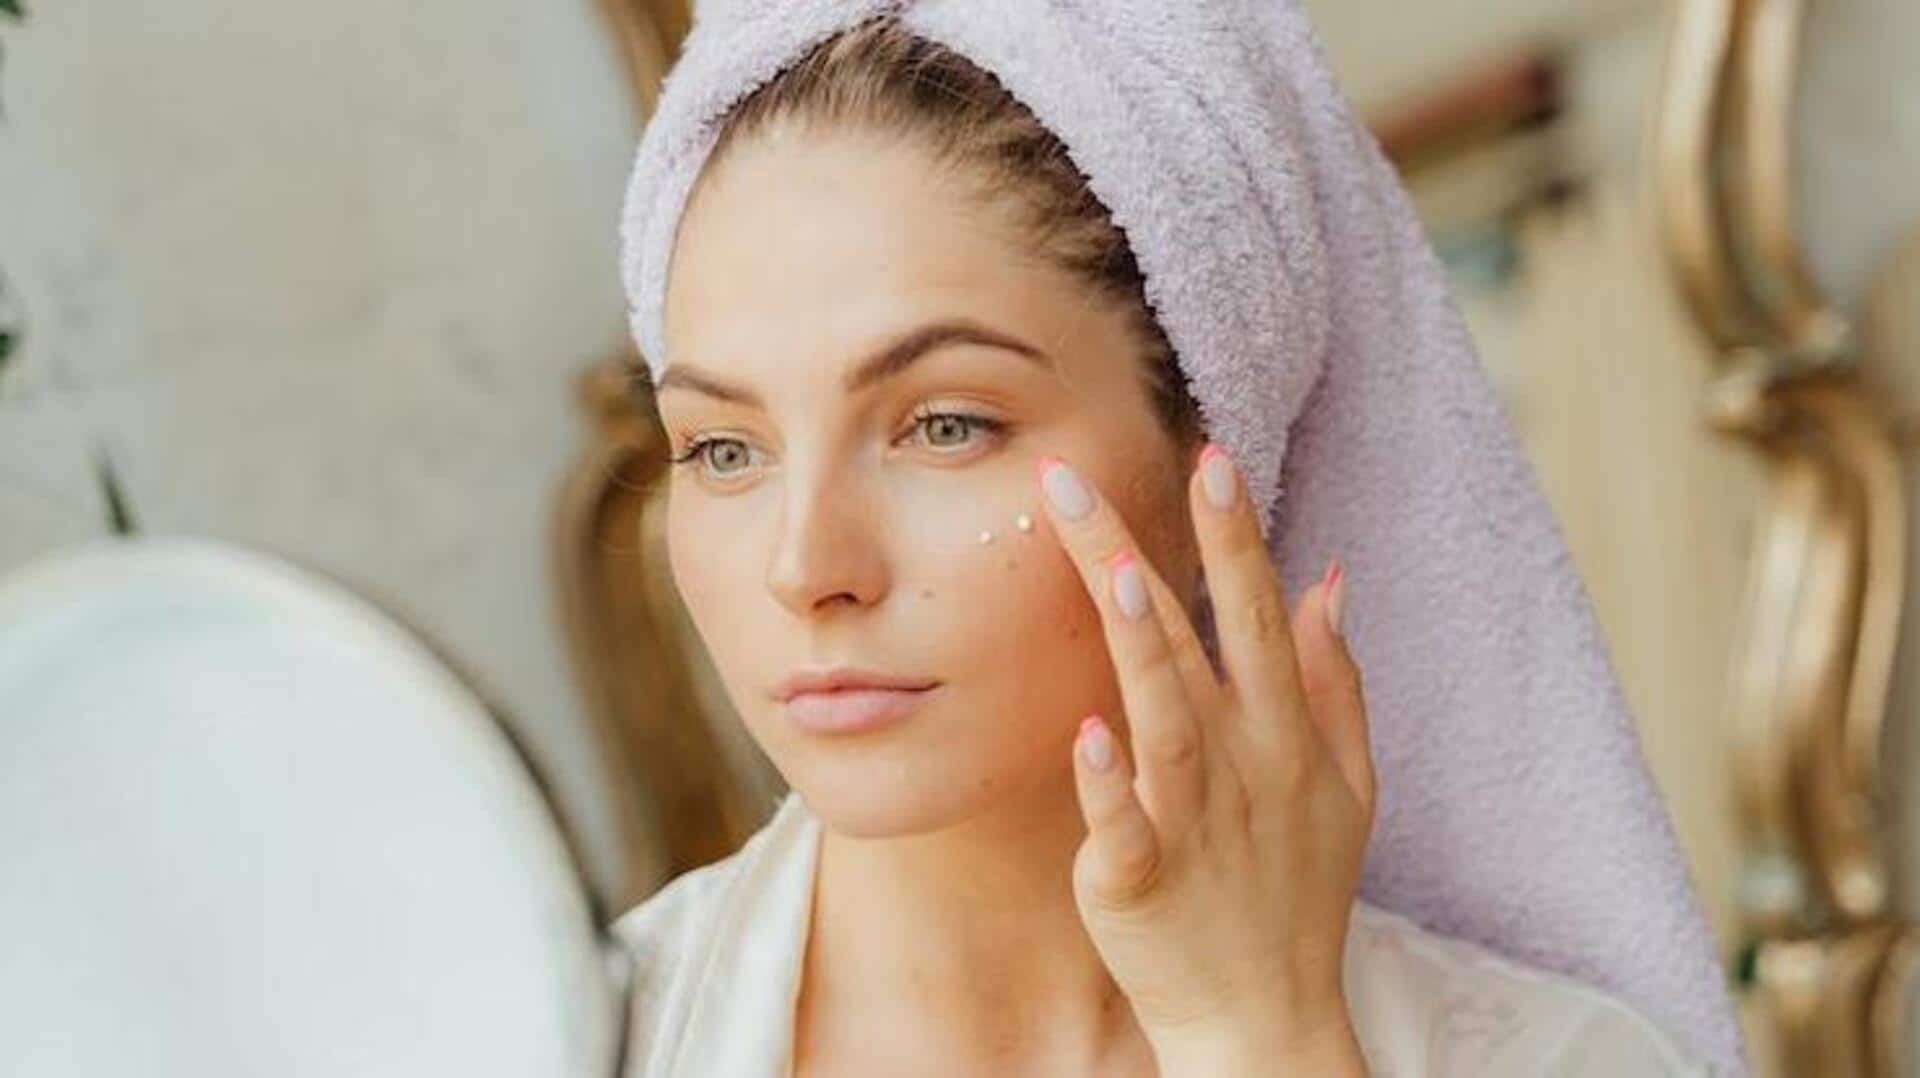 Signs you could be using the wrong moisturizer